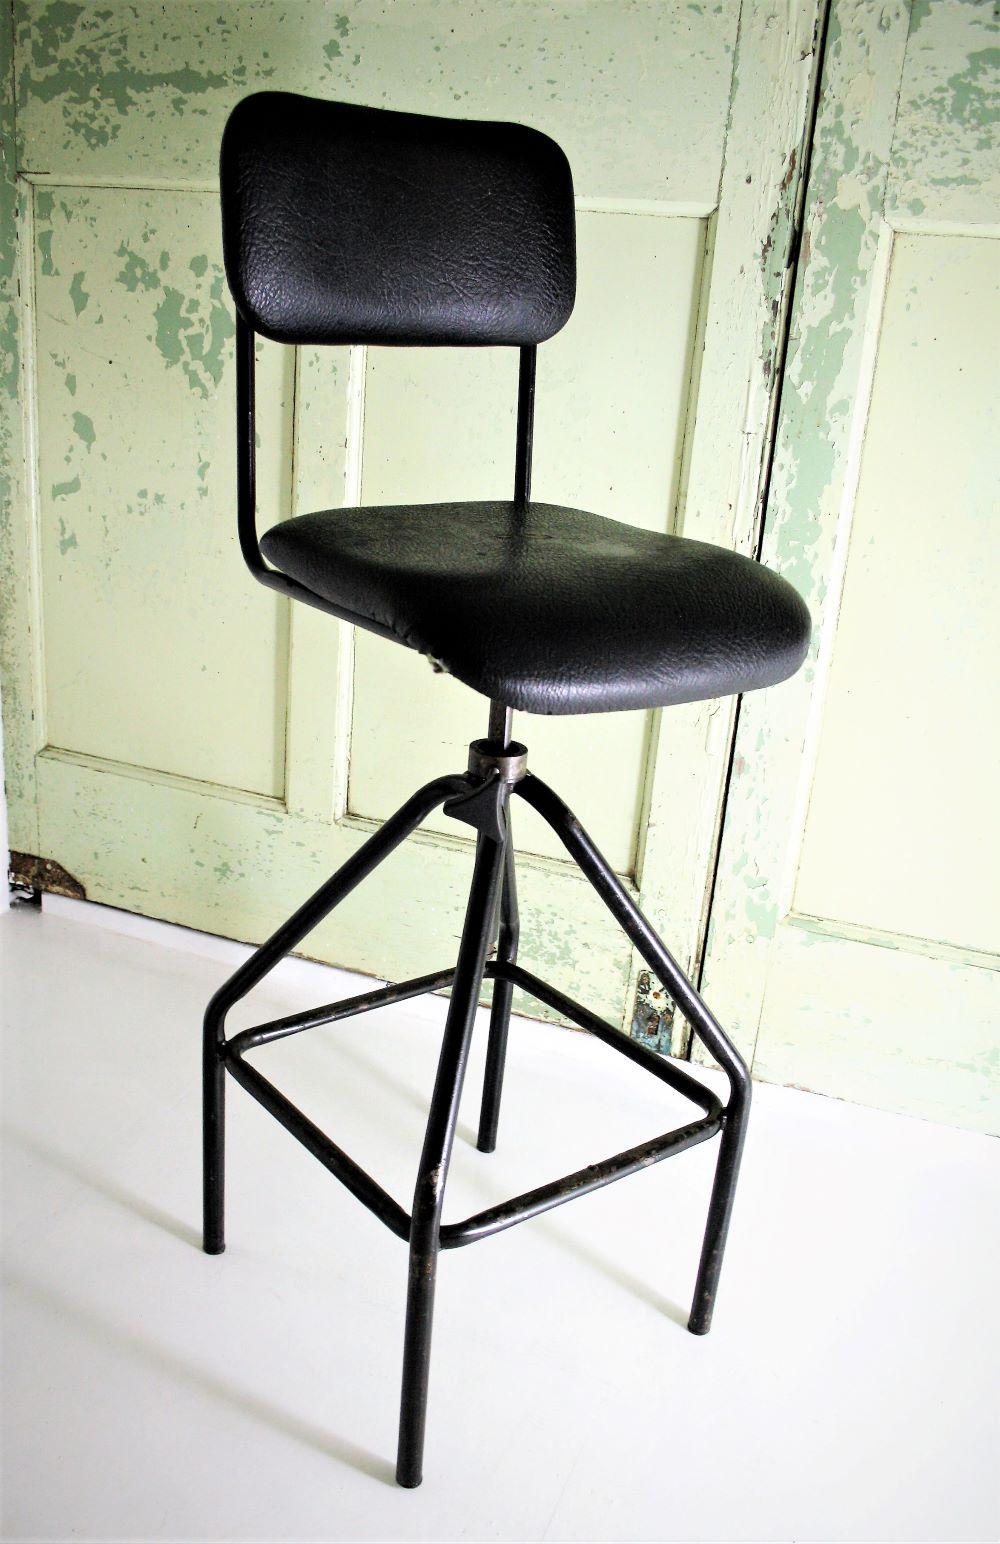 1970s Industrial Factory Swivel Stool with Backrest Sturdy Black metal frame 5